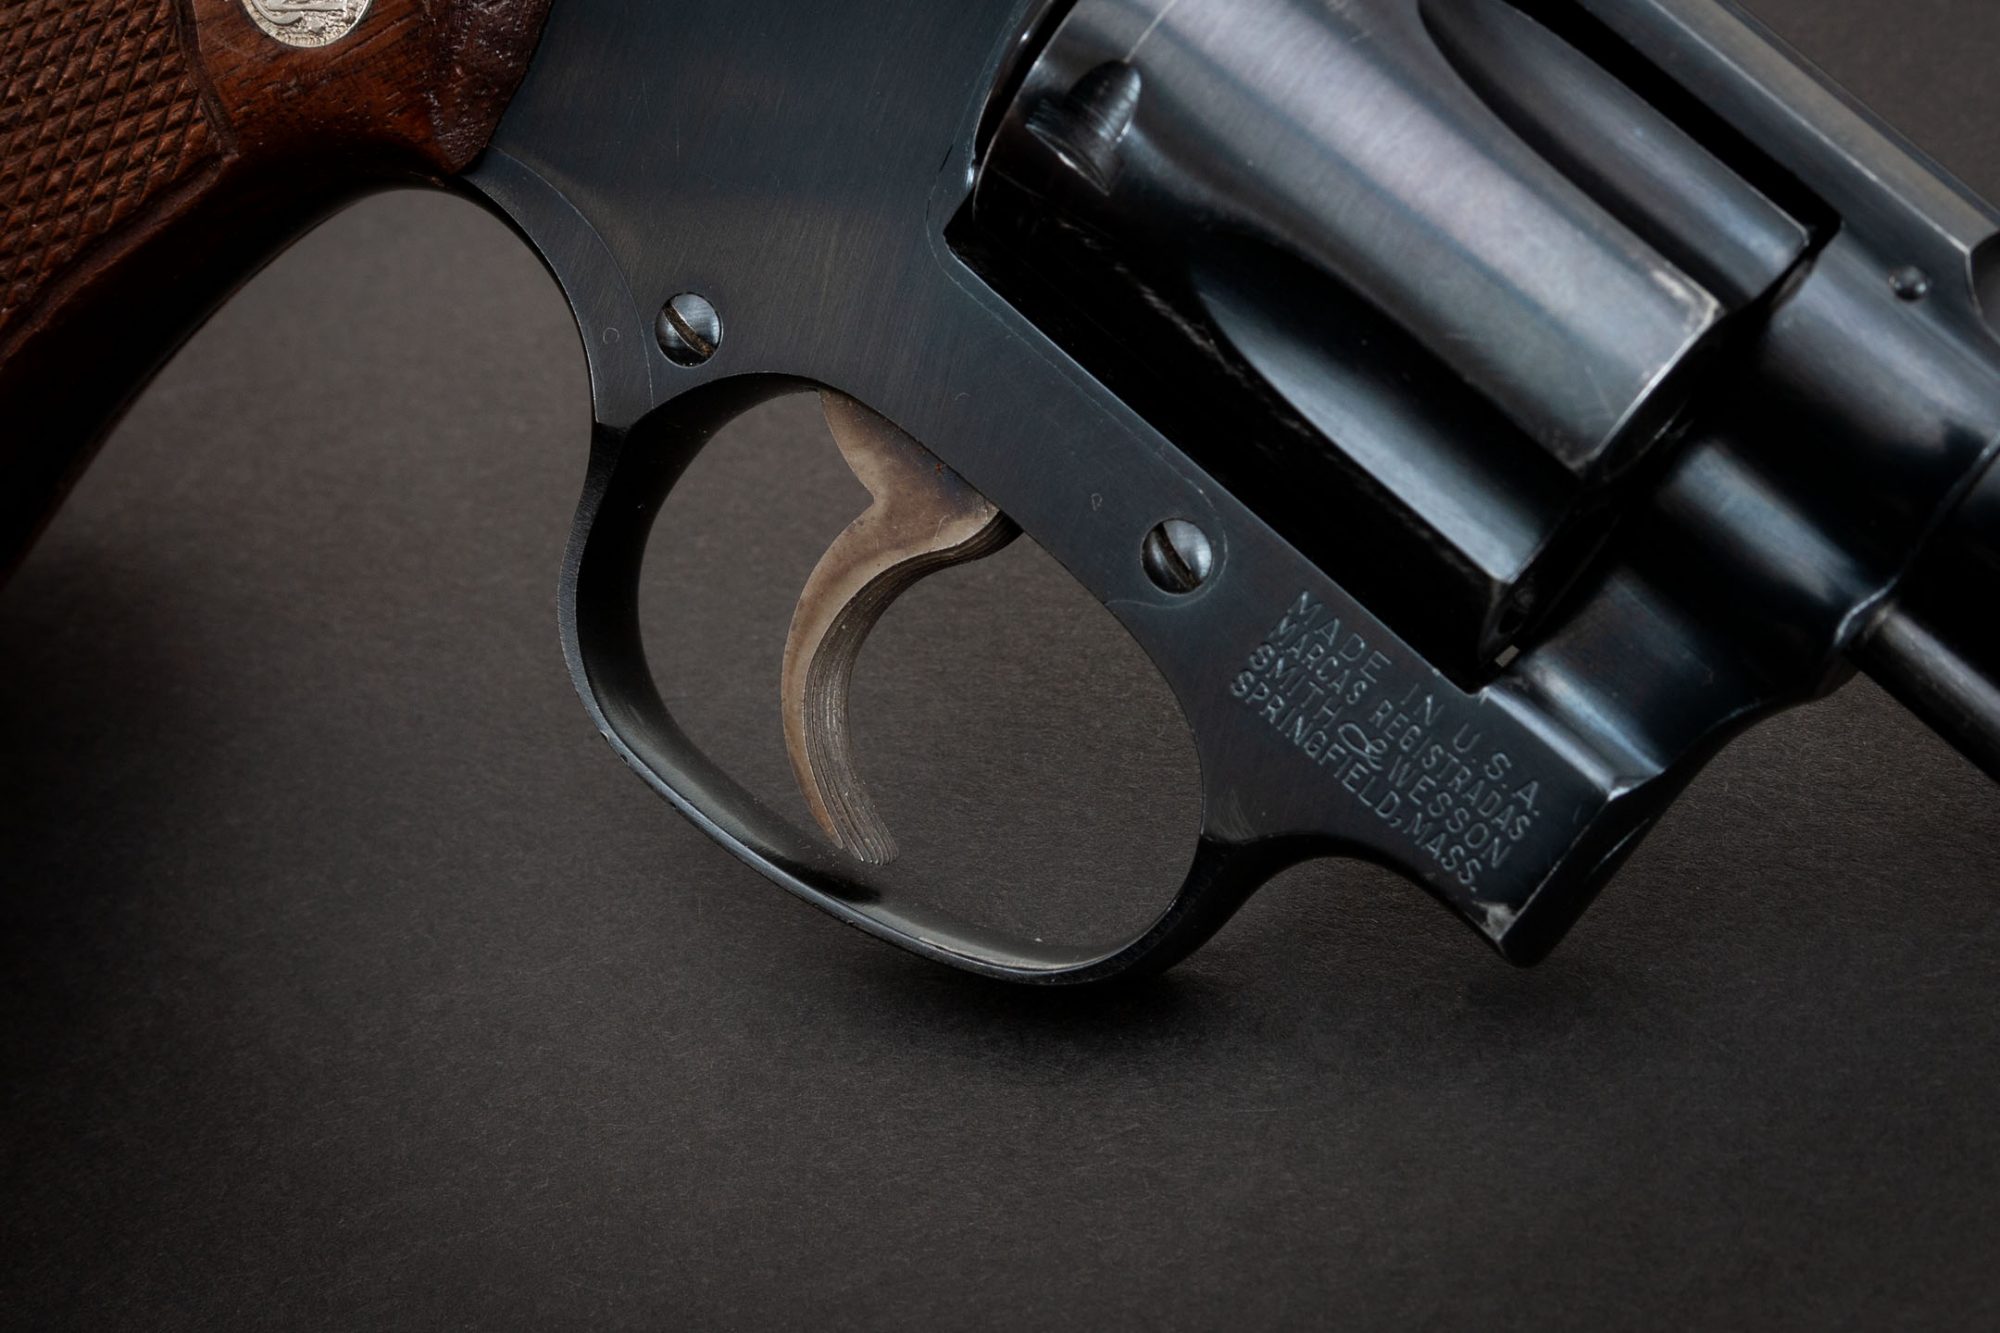 Photo of a pre-owned Smith & Wesson Model 36 for sale by Turnbull Restoration of Bloomfield, NY